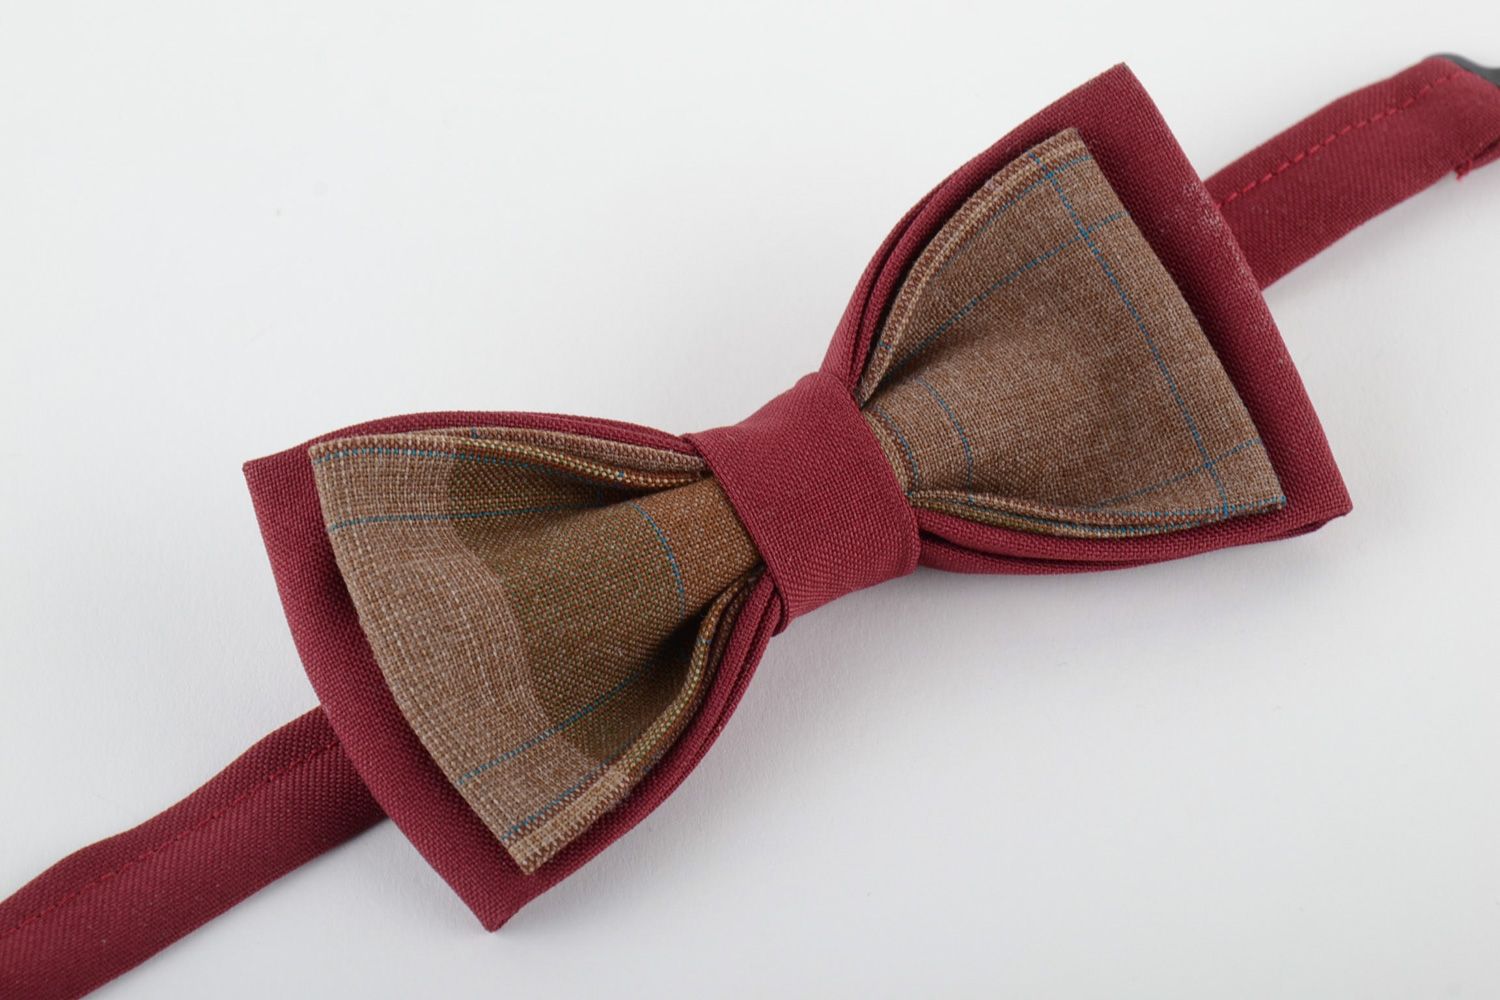 Handmade stylish bow tie sewn of costume fabric of dark red and brown colors photo 4